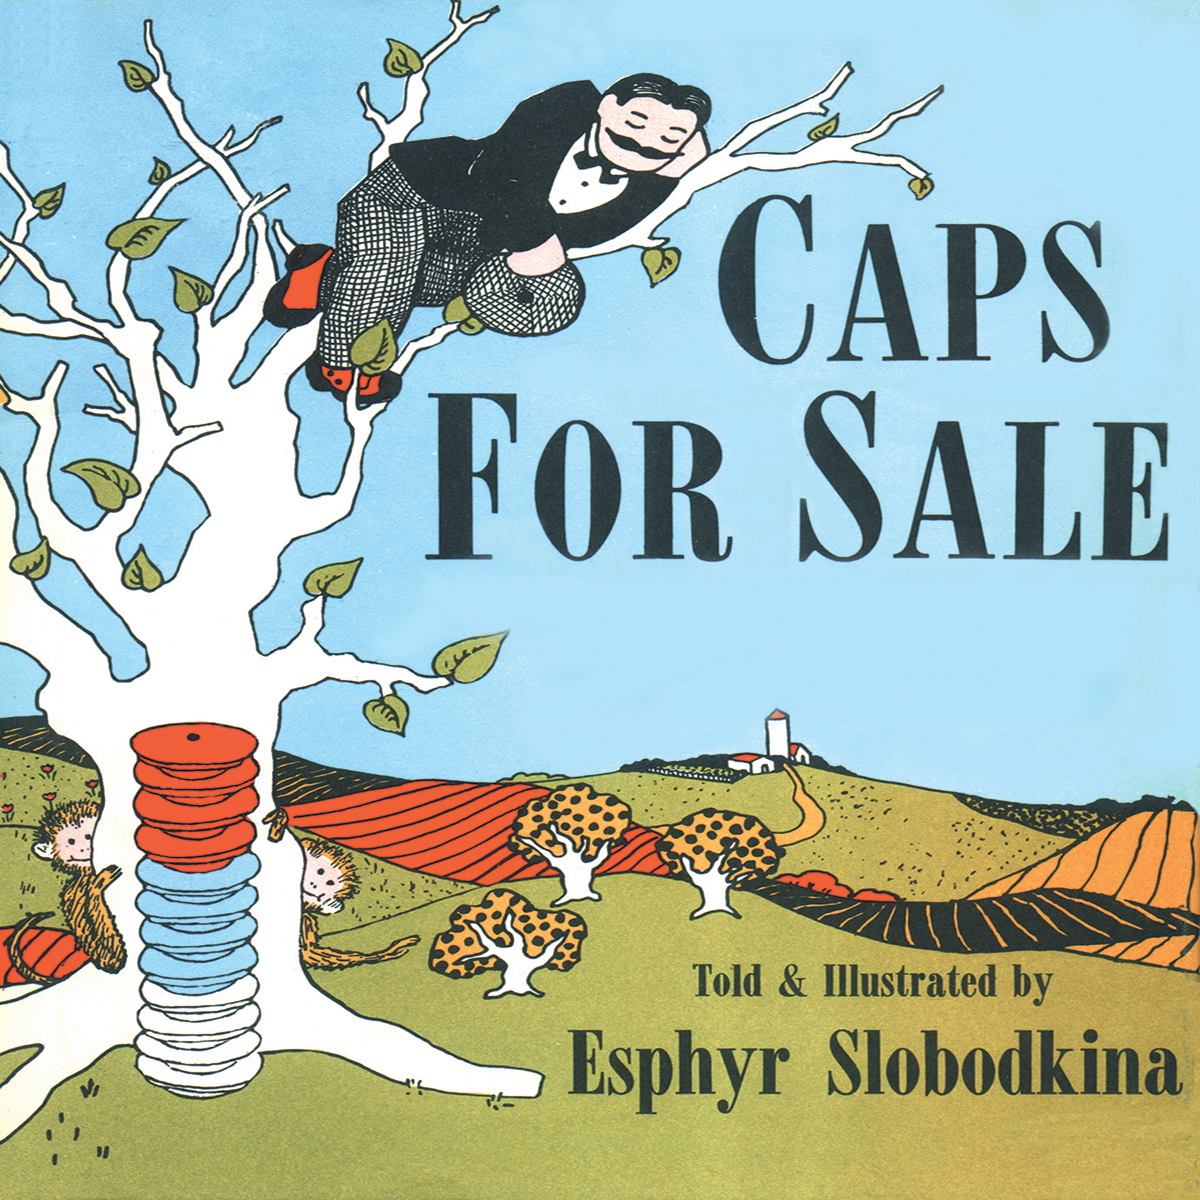 Caps for Sale, a story by Esphyr Slobodkina